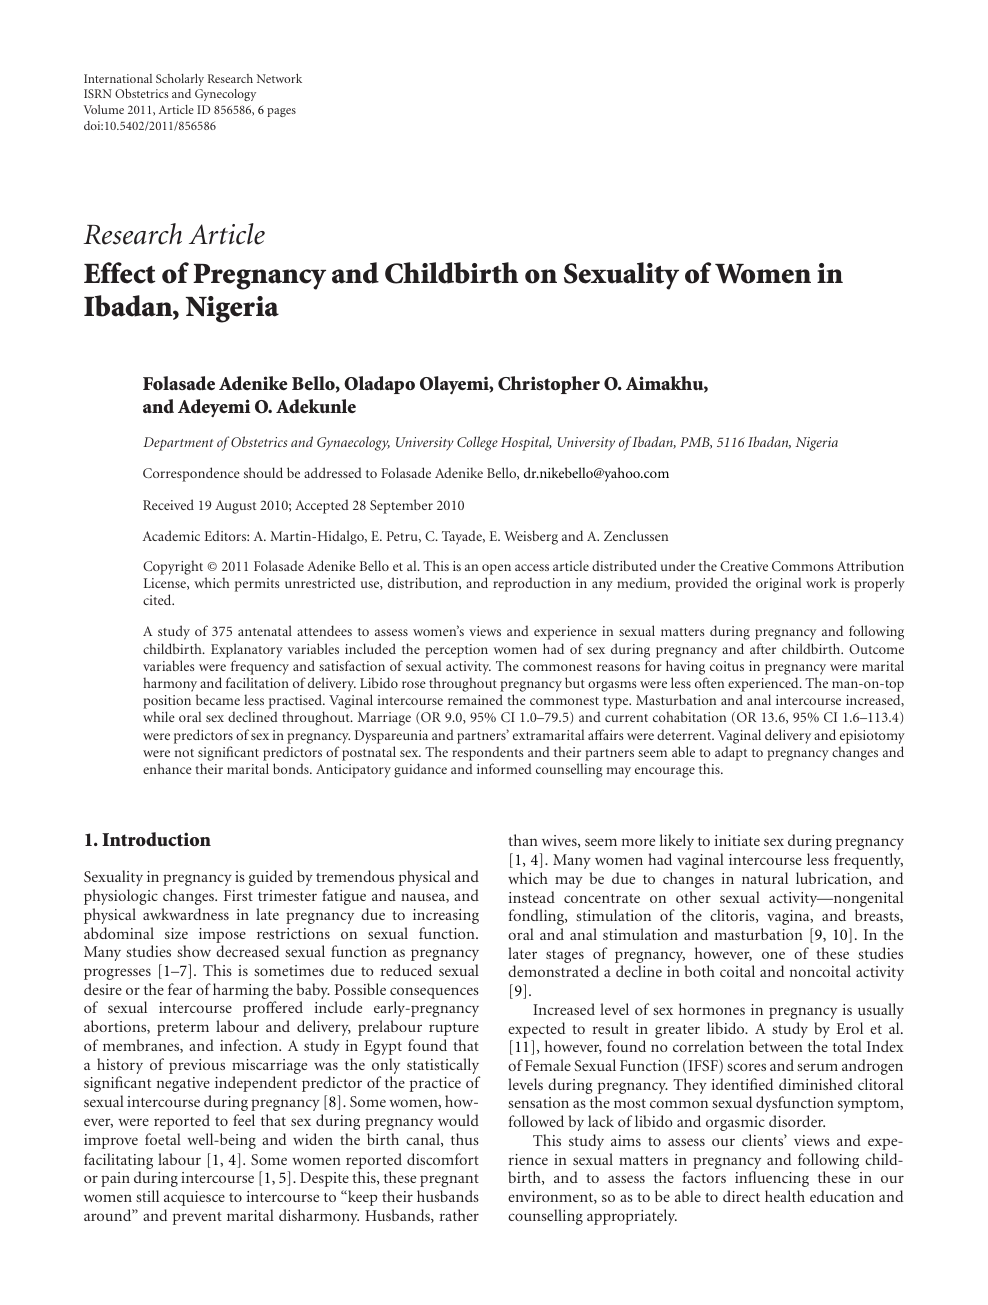 Effect of Pregnancy and Childbirth on Sexuality of Women in Ibadan, Nigeria  – topic of research paper in Health sciences. Download scholarly article  PDF and read for free on CyberLeninka open science